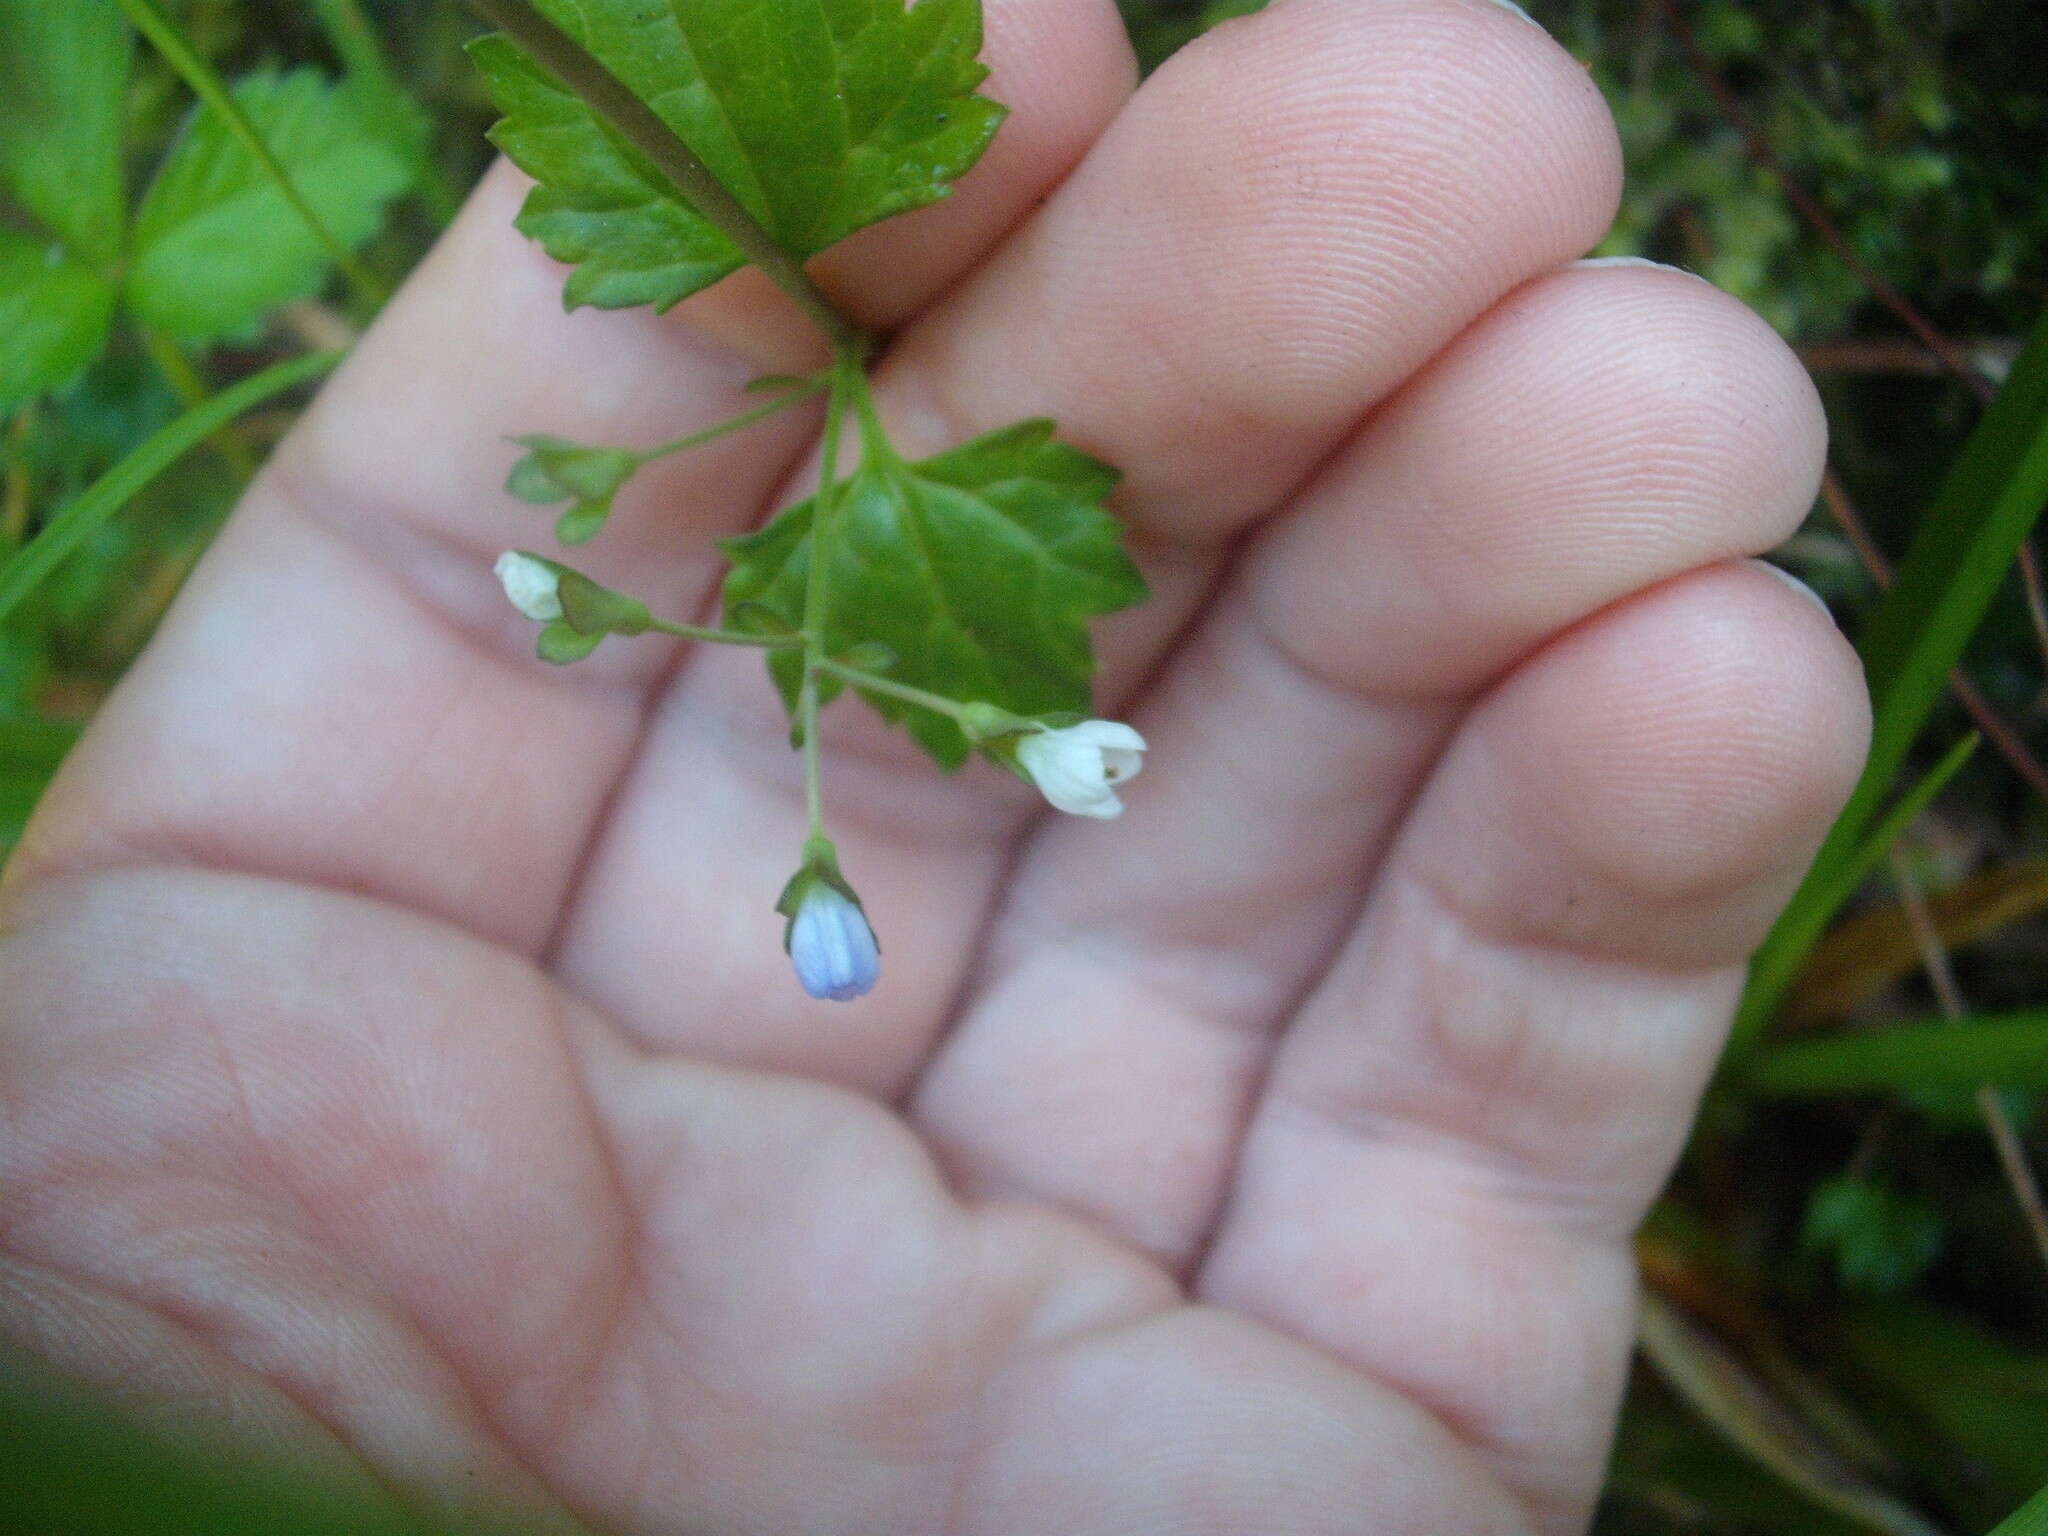 Image of Speedwell